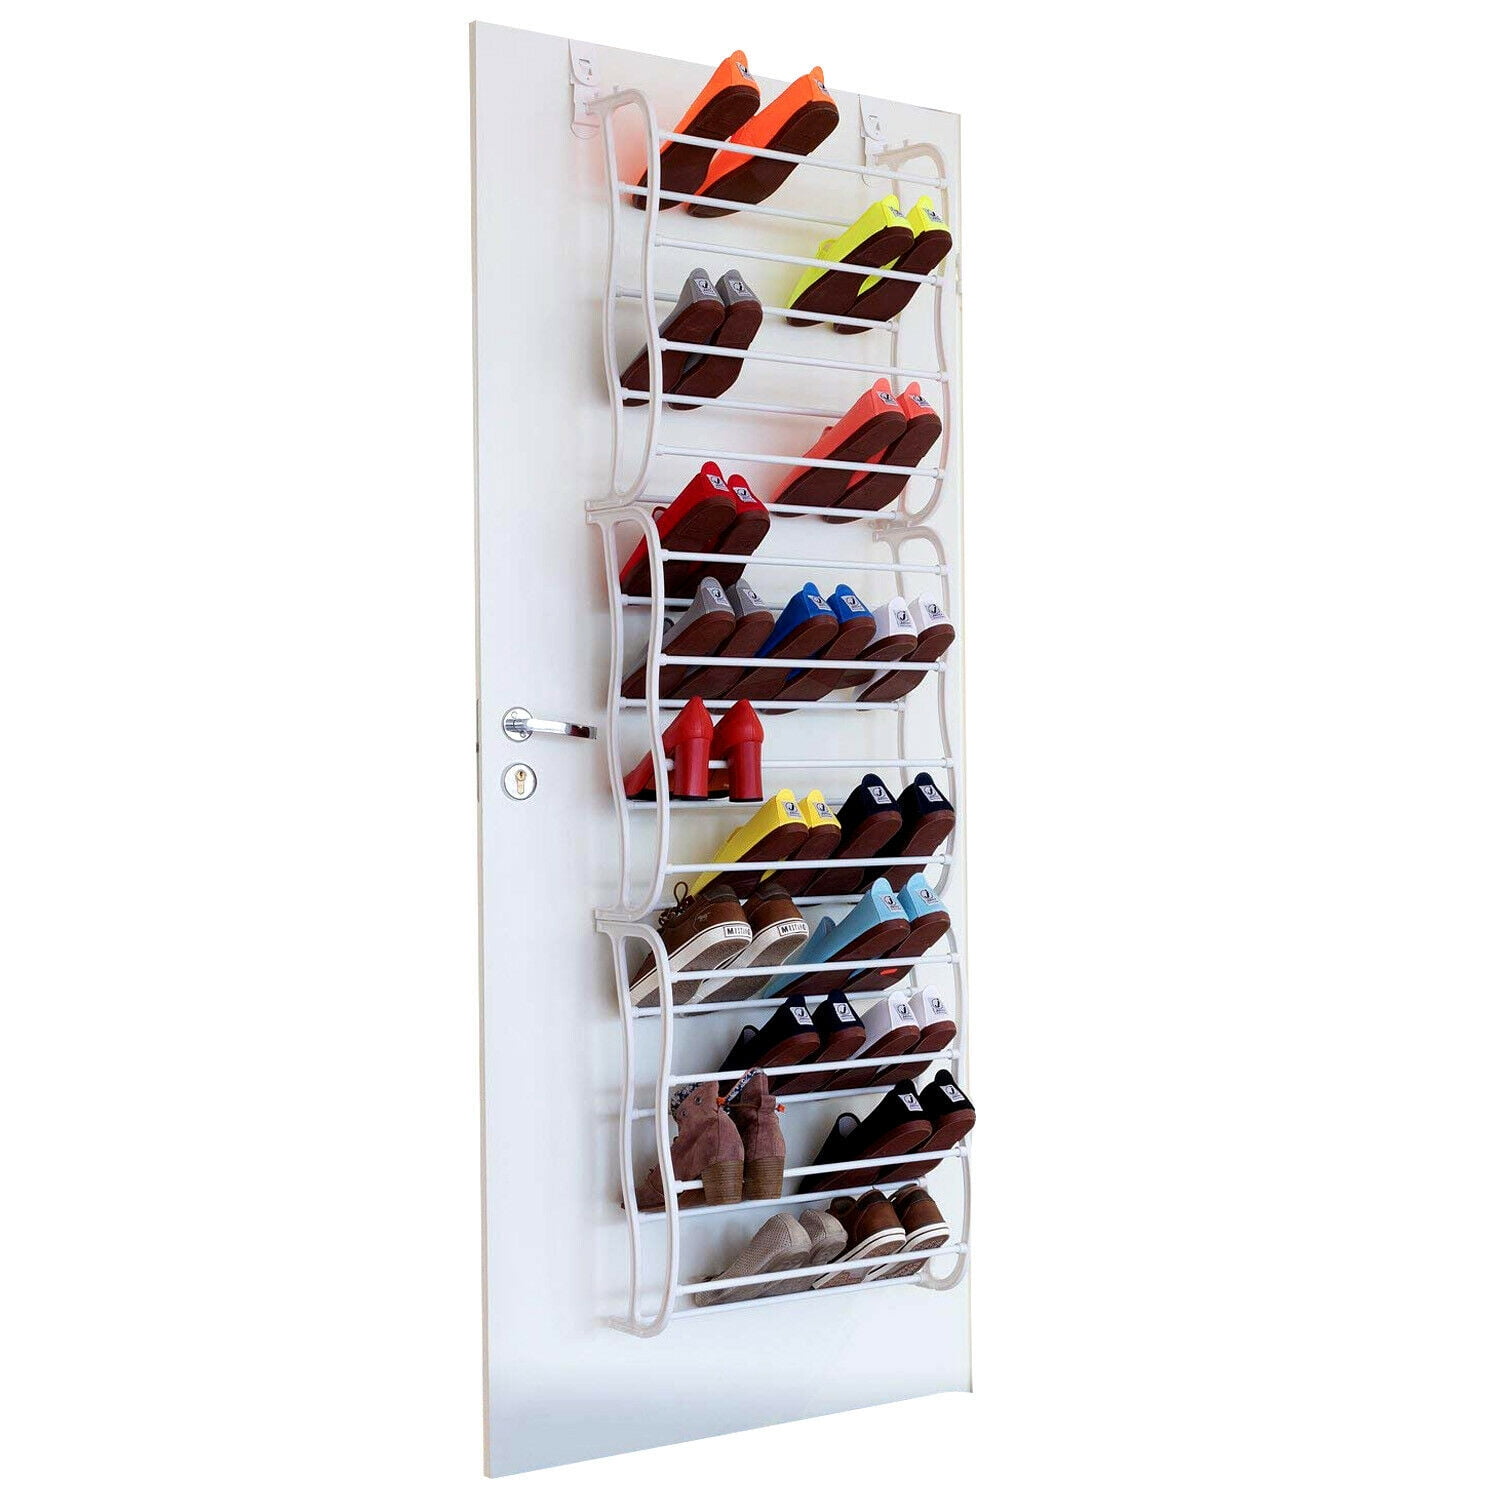 Over-The-Door Shoe Rack for 36 Pair Wall Hanging Closet Organizer Storage Stand 